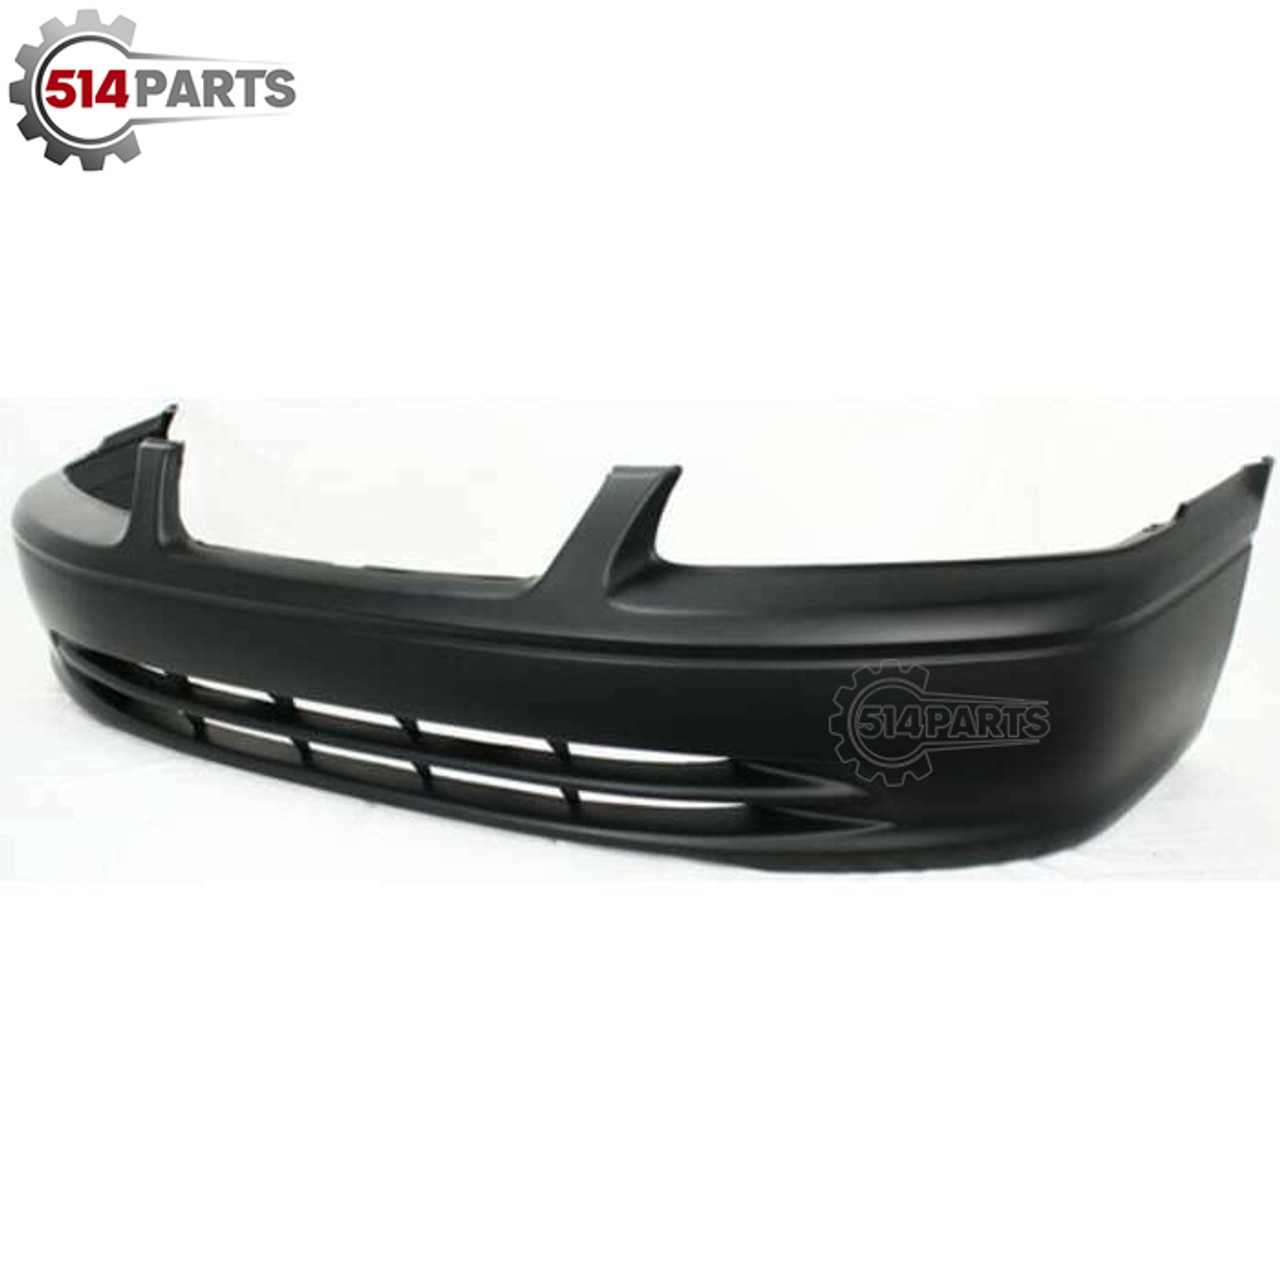 2000 - 2001 TOYOTA CAMRY PRIMED FRONT BUMPER COVER - PARE-CHOCS AVANT PRIME